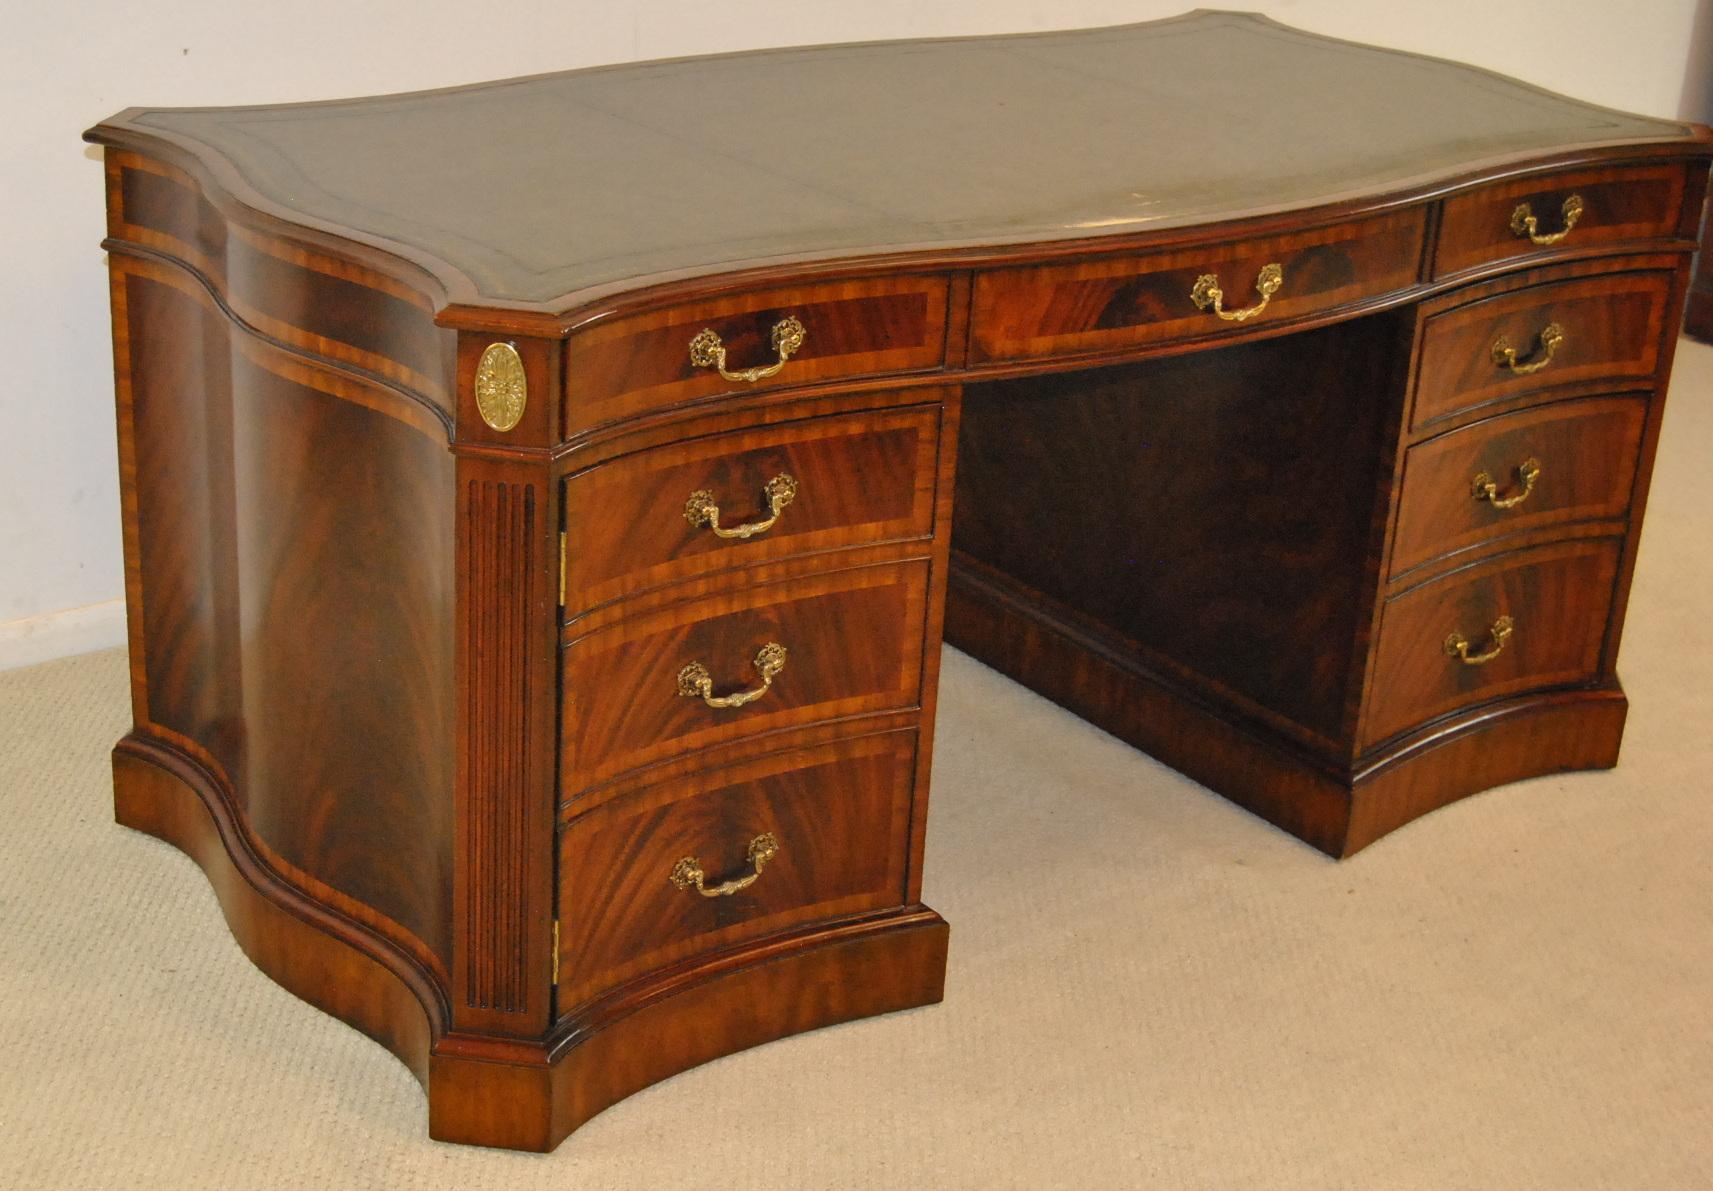 An impressive double sided partners desk by Maitland-Smith. This fantastic desk feature banded inlay drawers, serpentine sides and a leather top. There are two file drawers, two doors and six drawers. Both sides are matching. The dimensions are 64